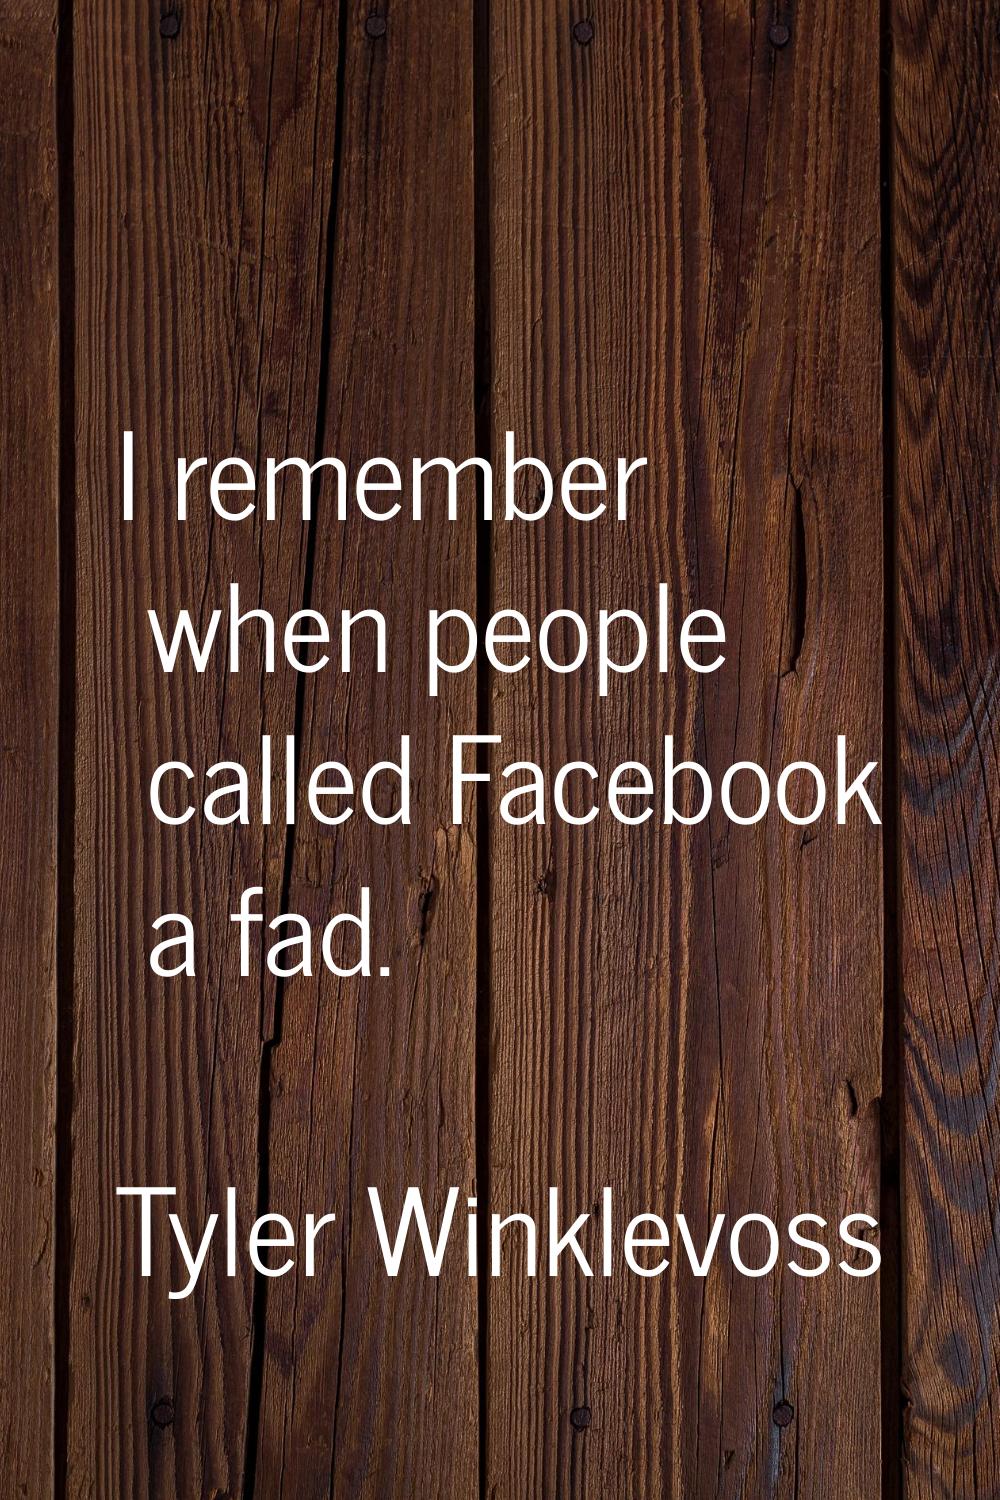 I remember when people called Facebook a fad.